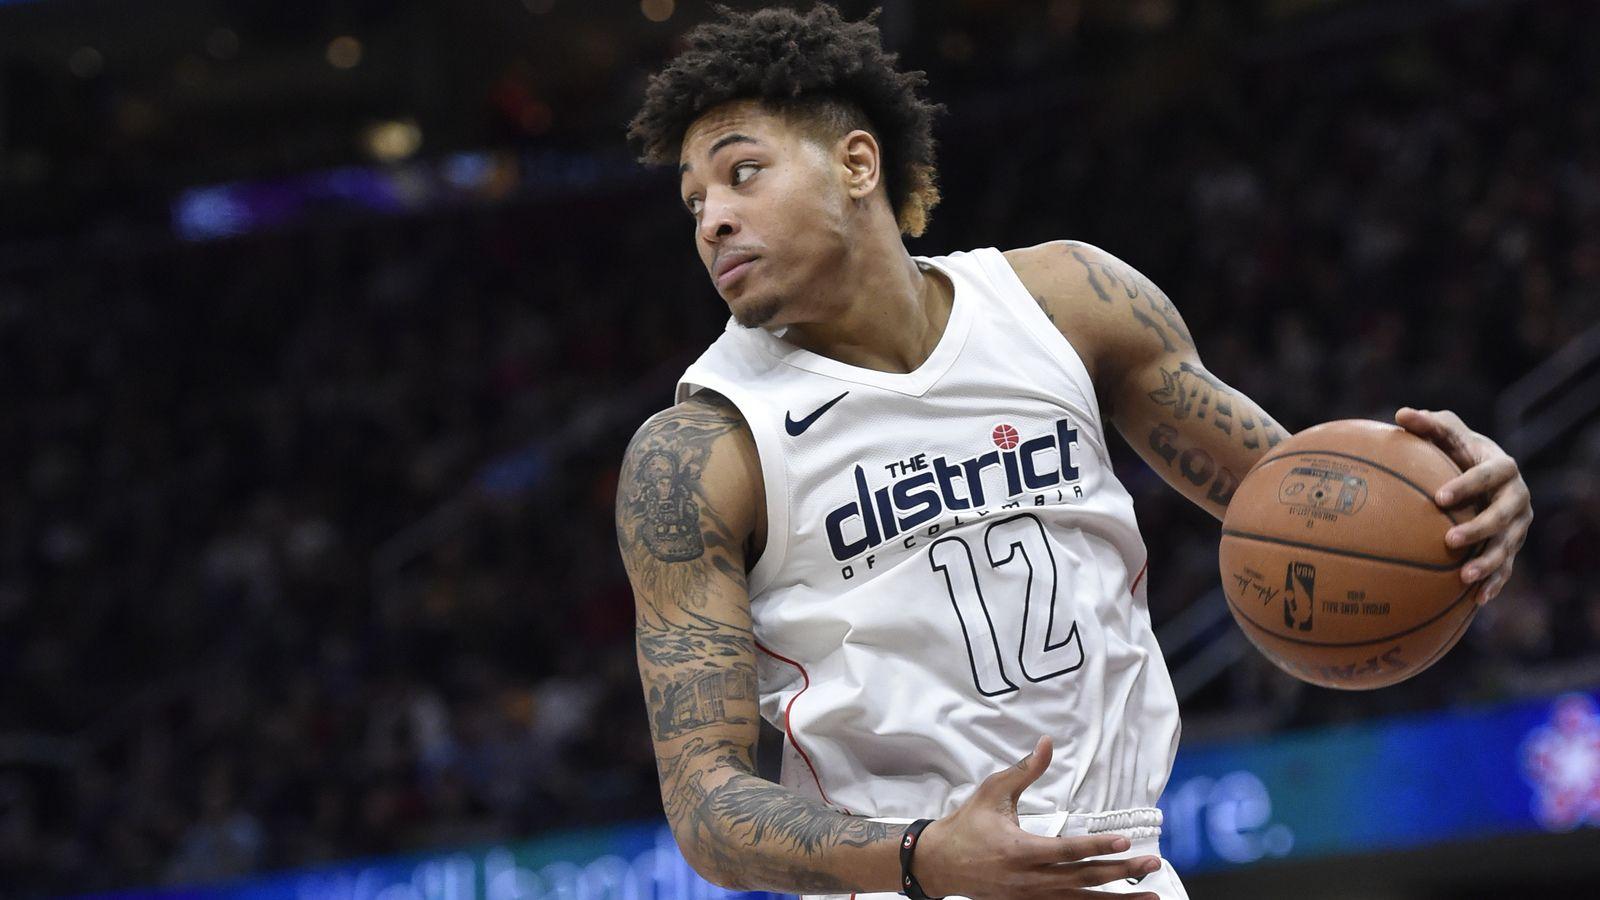 Watch: Kelly Oubre caught untying Rodney Hood's sneakers during game